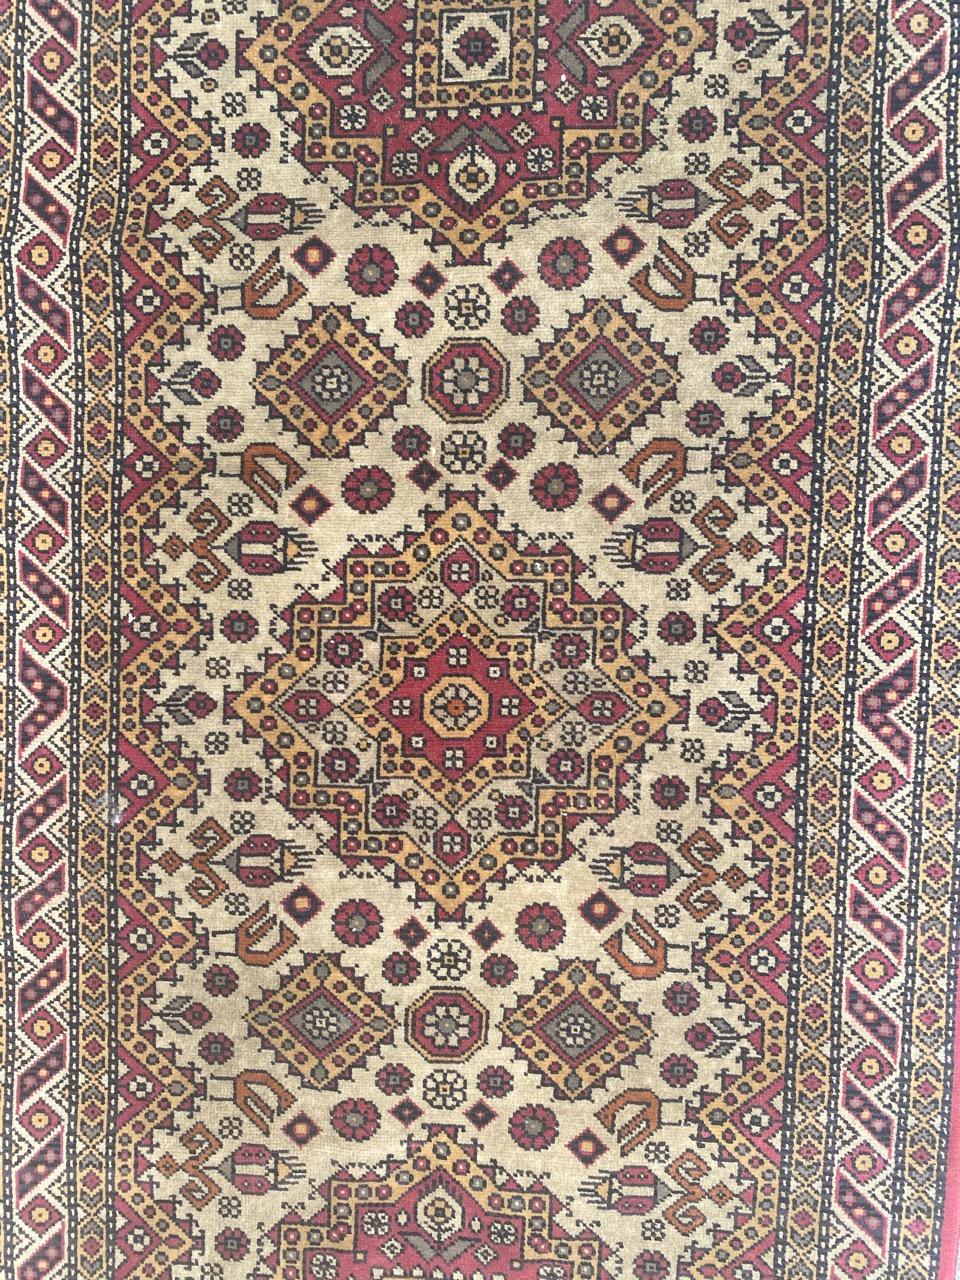 Nice vintage Azerbaïdjan rug with beautiful Caucasian design and beautiful colors, entirely and finely hand knotted with wool velvet on cotton foundation.

✨✨✨
